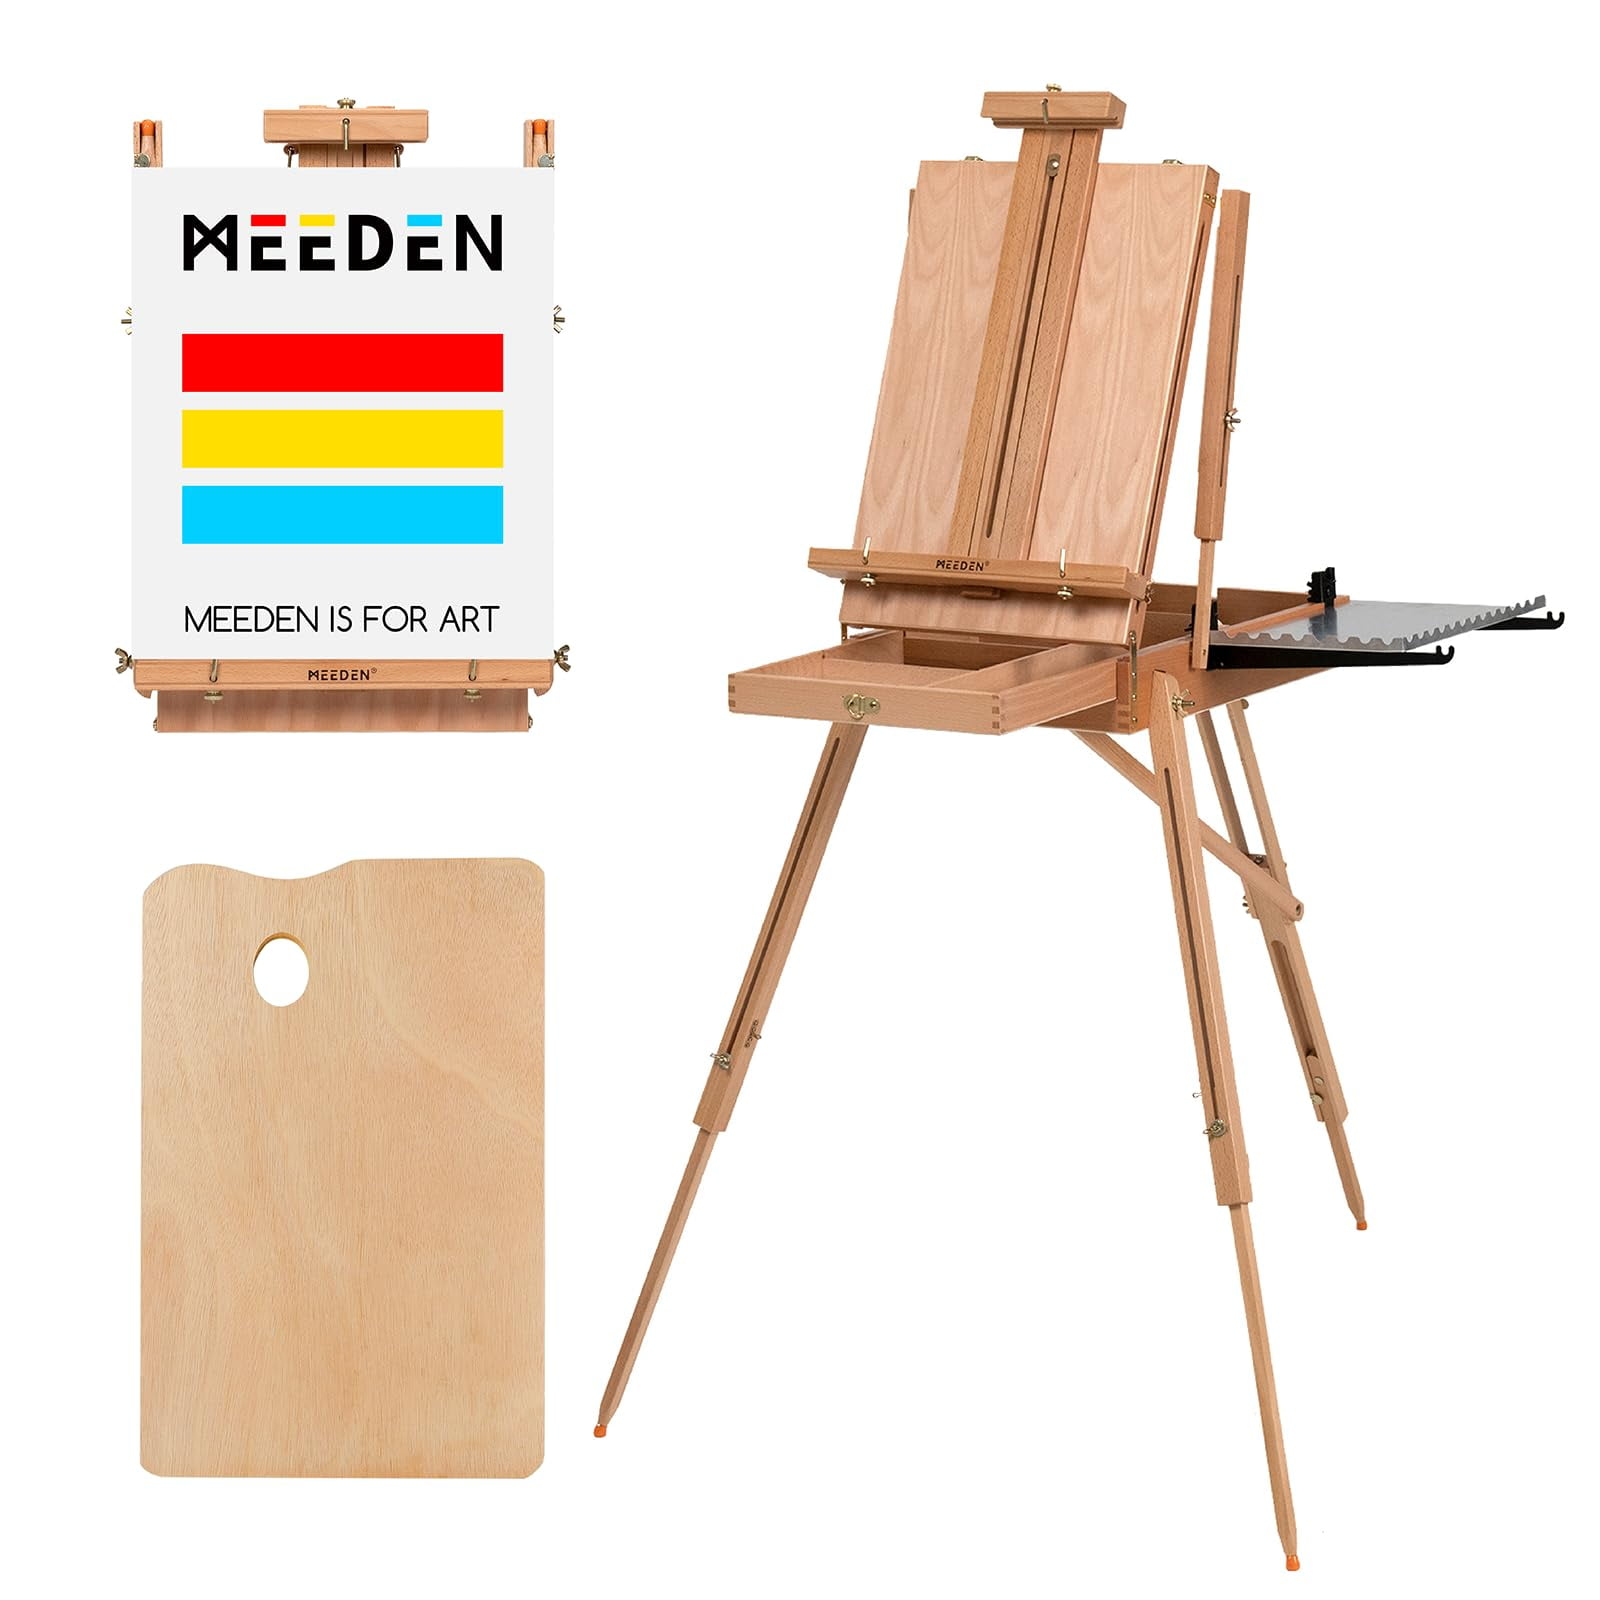 MEEDEN French Easel, Wooden Field Easel, Studio Sketchbox Easel with Artist  Drawer, Palette, Hold Canvas to 34, Beechwood - Adjustable Wood Tripod